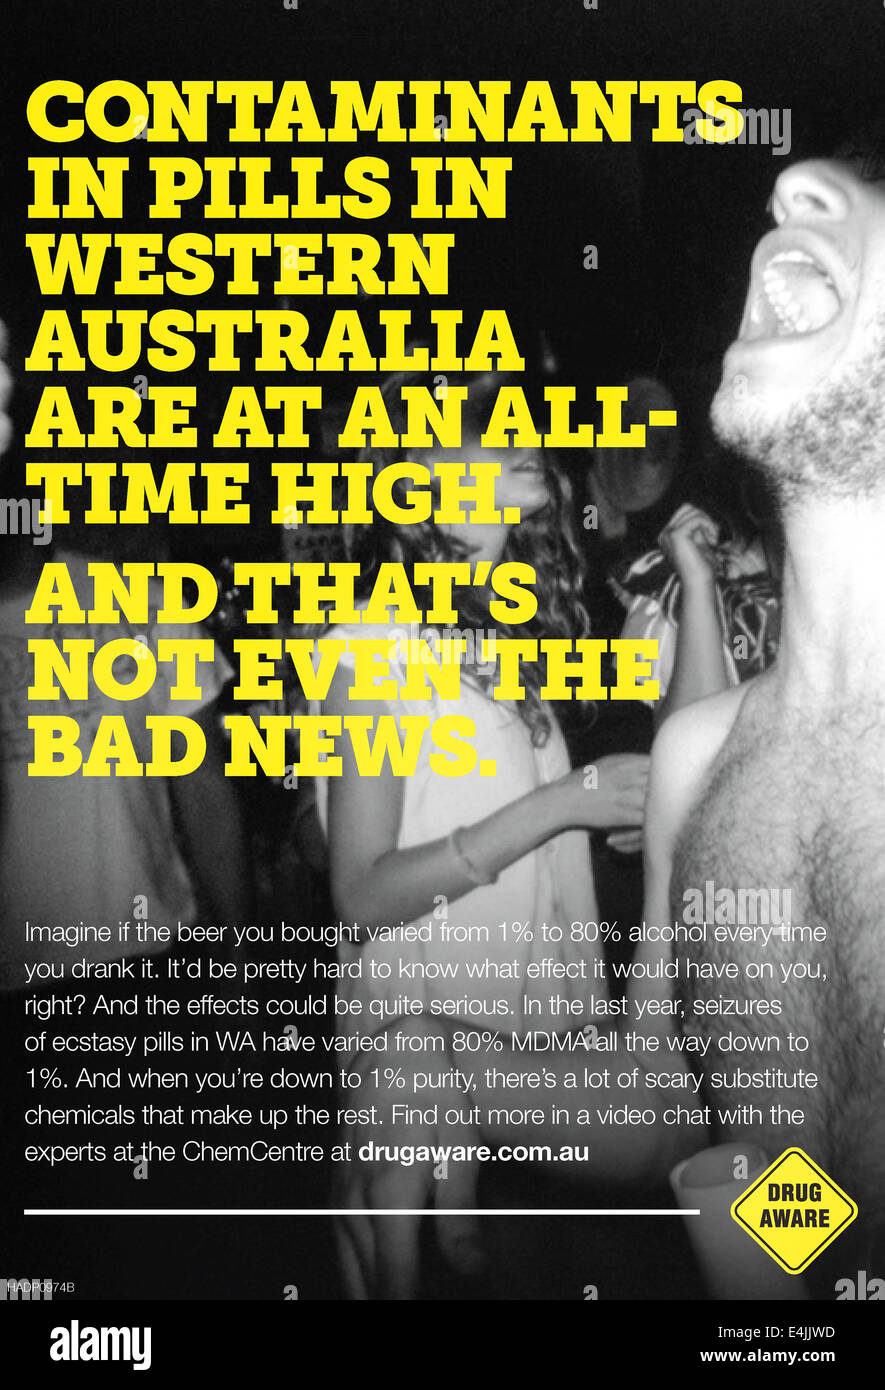 'Contaminants in Pills in Western Australia are at an All-Time High...' Ecstasy Campaign poster, Australia 2011. See description for more information. Stock Photo